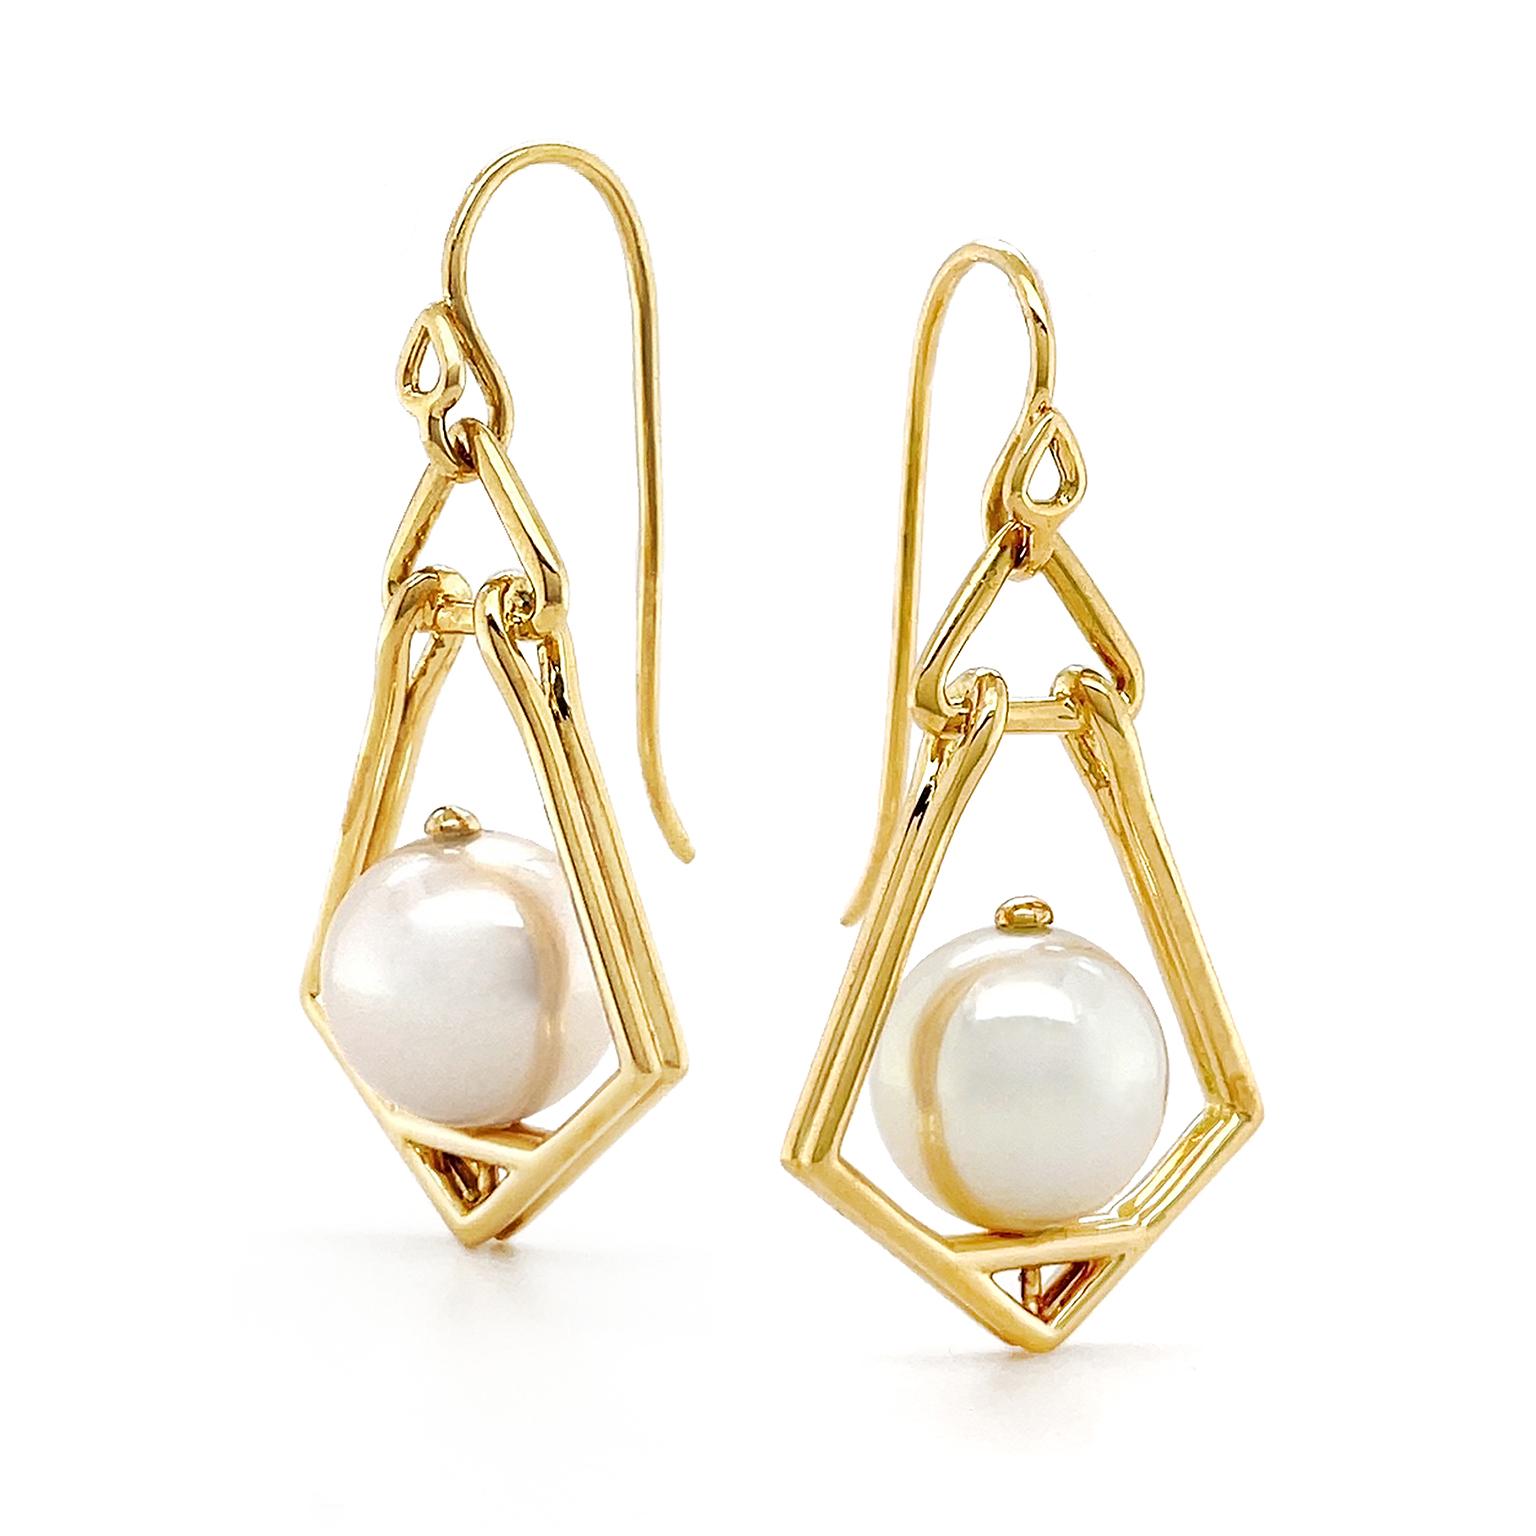 Valentin Magro Geometric Lantern Large Pearl Earrings shine with iridescence rather than fire. Angular shapes flare down from 18k yellow gold French hooks, resembling an old-time lamp. Cultured pearls stand in for flames. Their microscopic structure